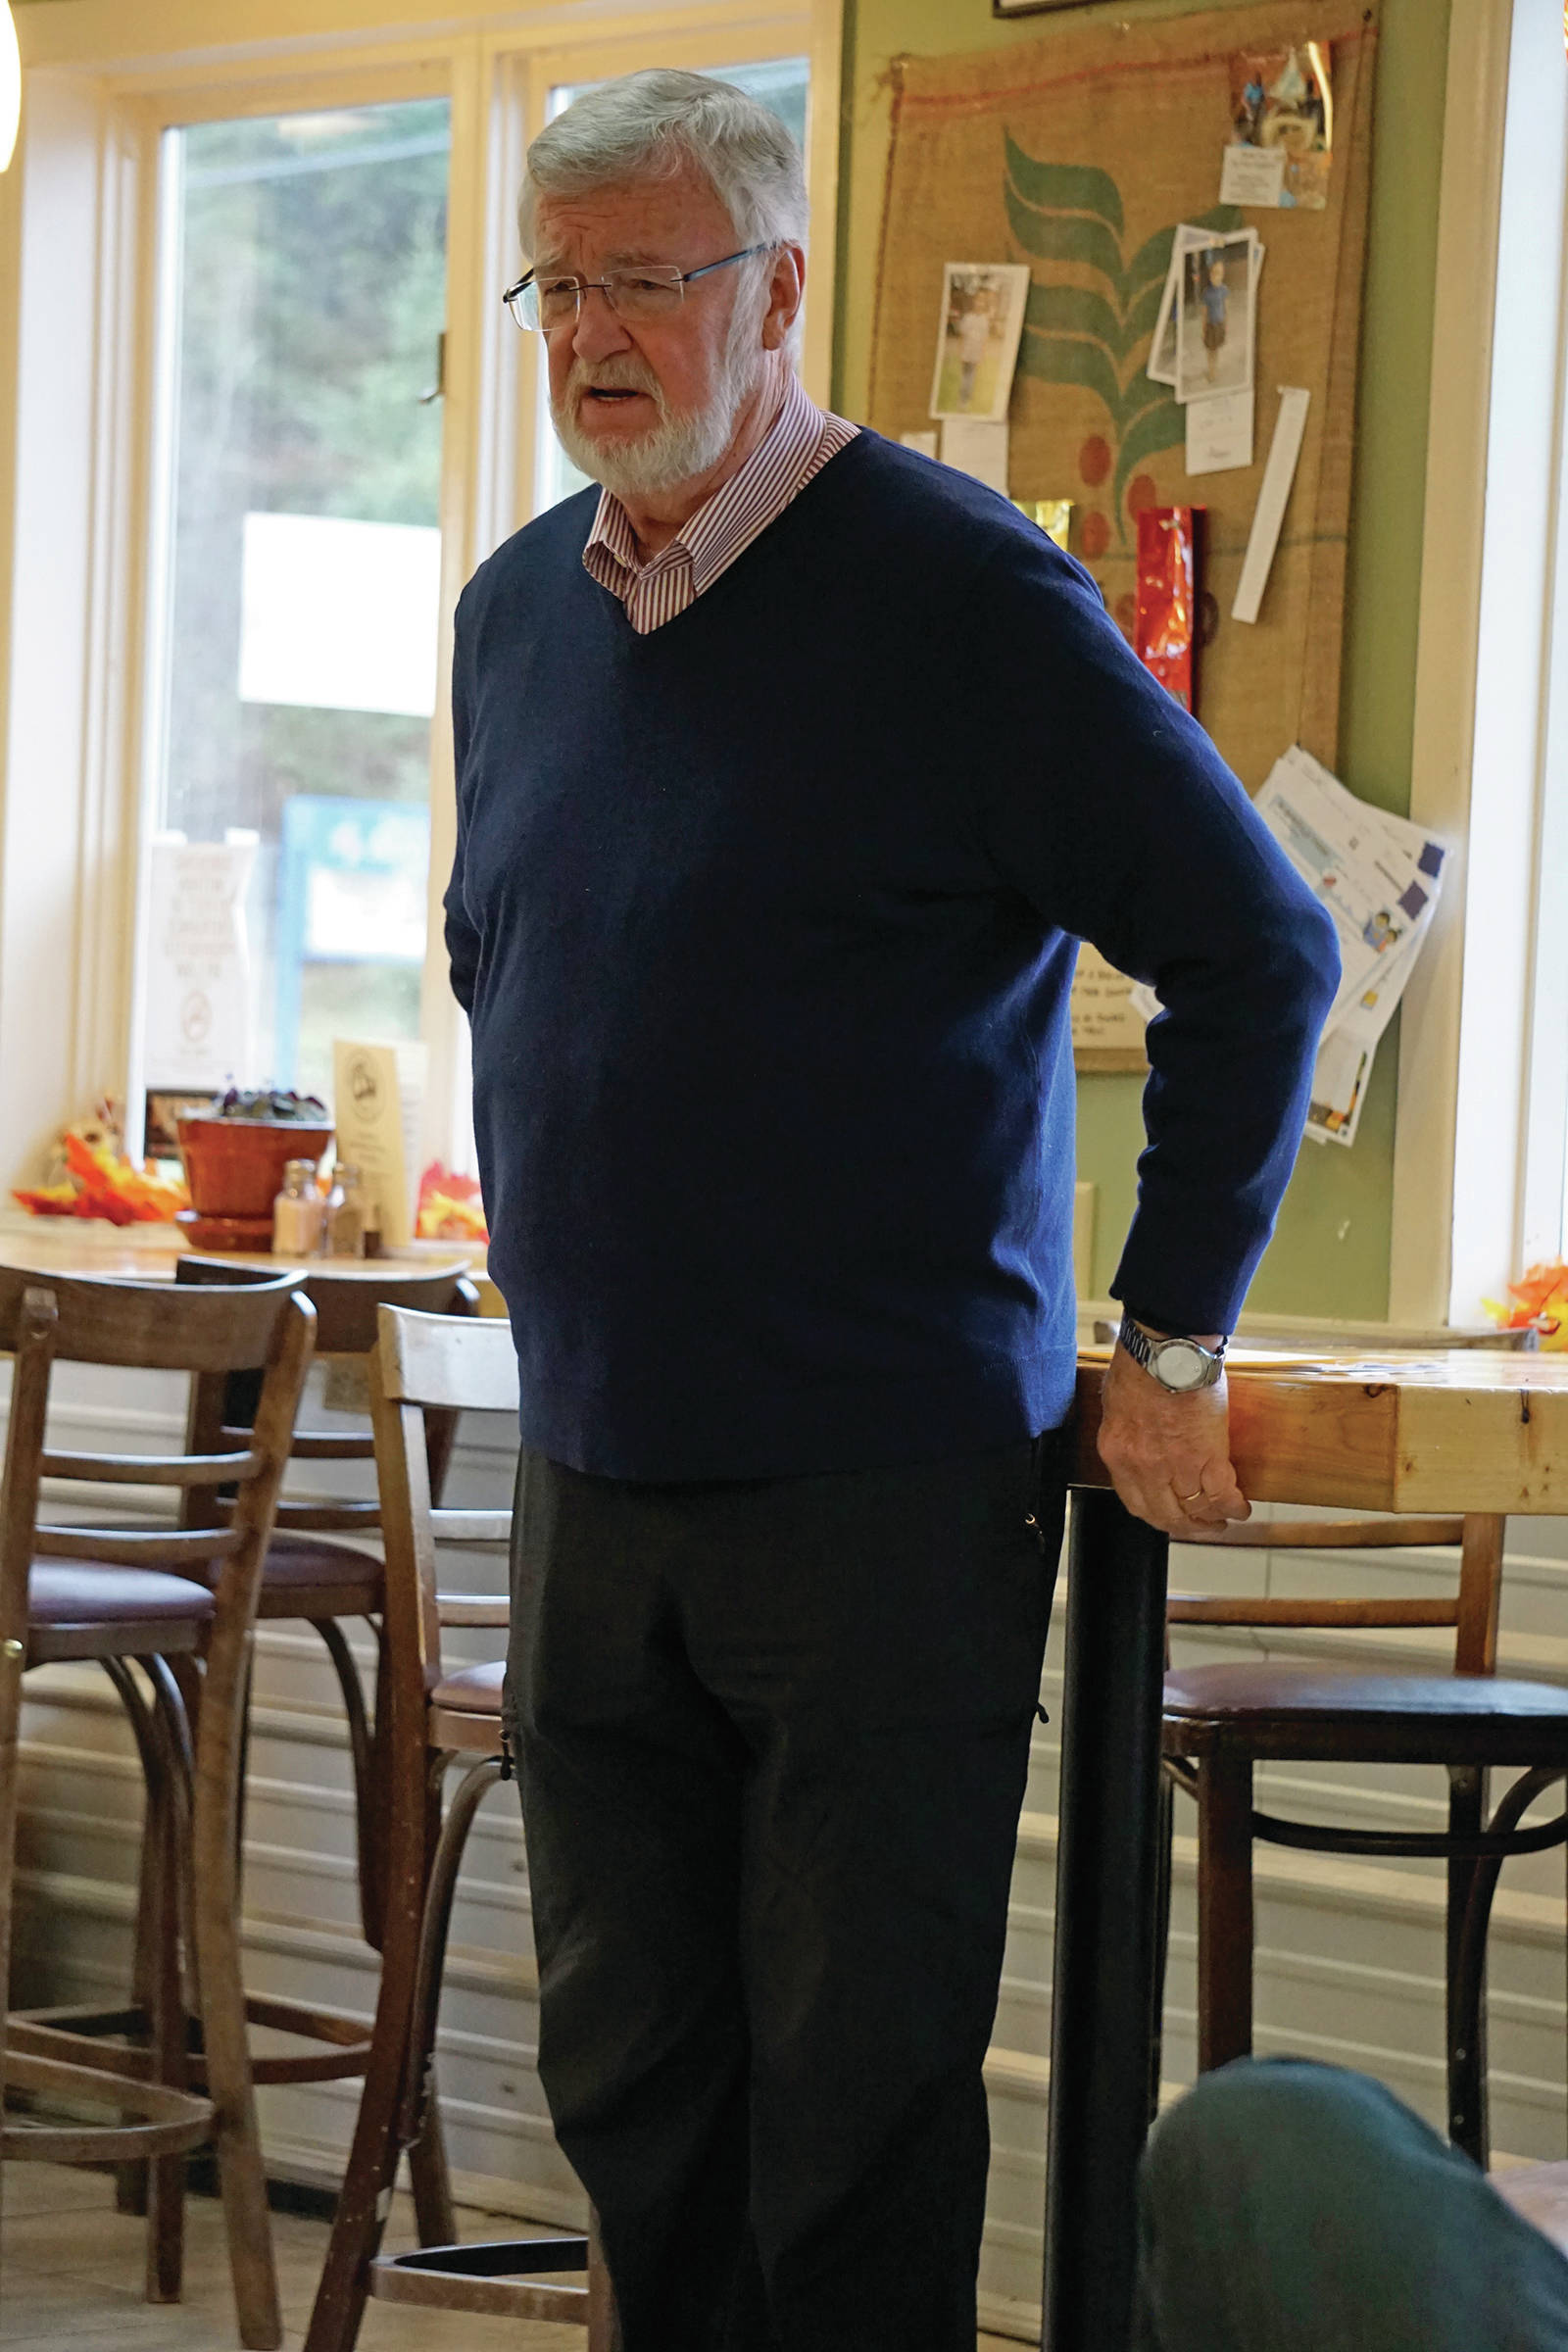 Sen. Gary Stevens, R-Kodiak, answers a question during a town meeting on Saturday, Nov. 9, 2019, at Captain’s Coffee in Homer, Alaska. (Photo by Michael Armstrong/Homer News)